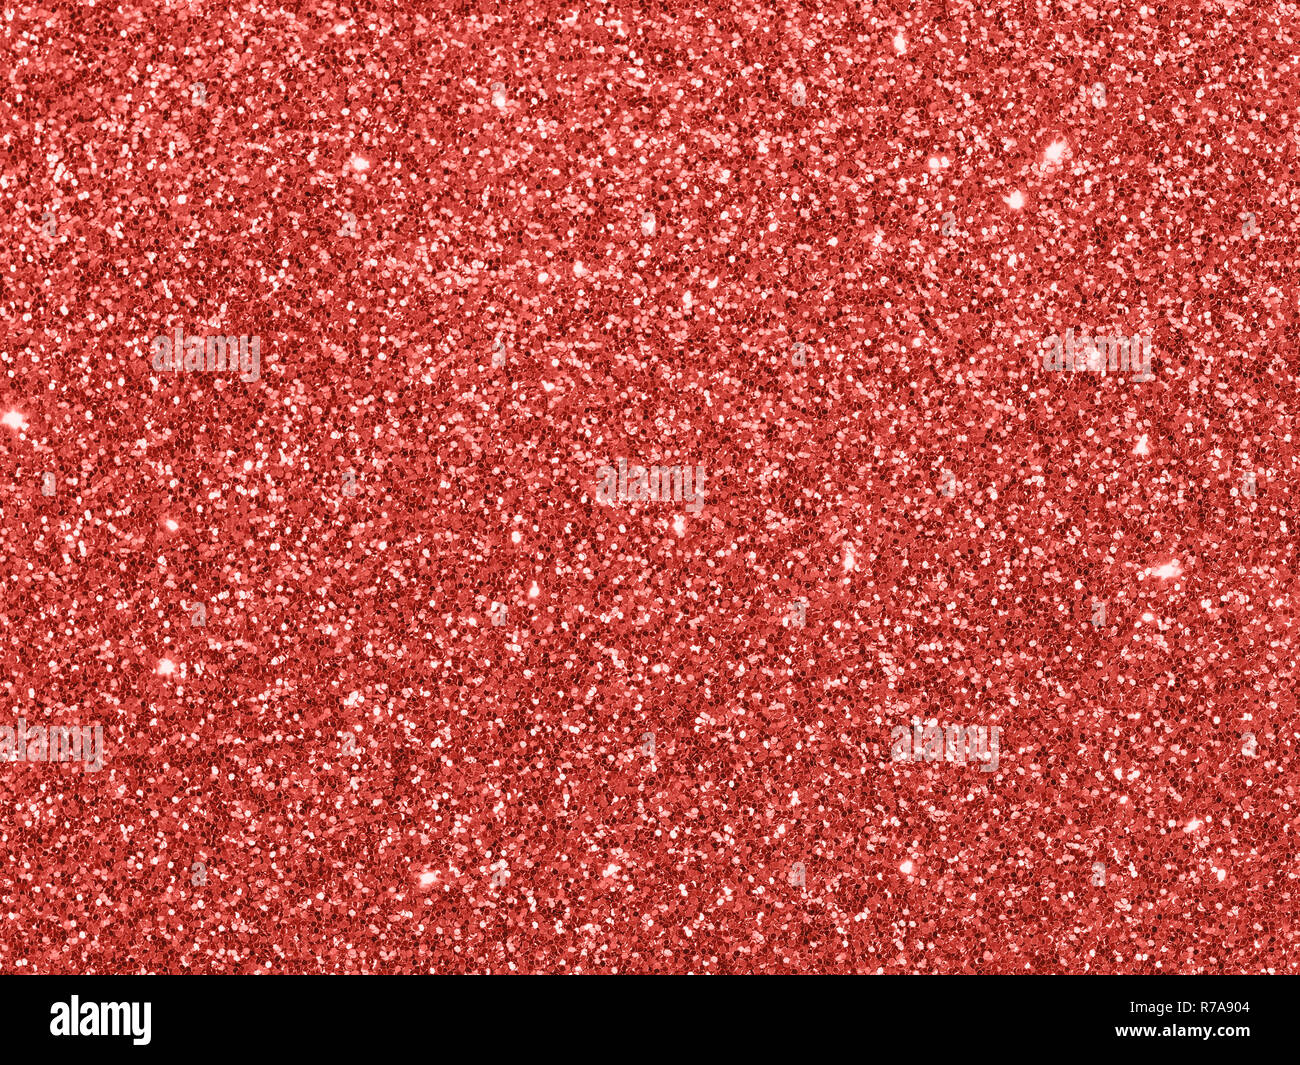 Sparkling background made of Living Coral 2019 lights. Festive blurred backdrop for holidays and parties. Top view or flat lay. Copy sace for text Stock Photo